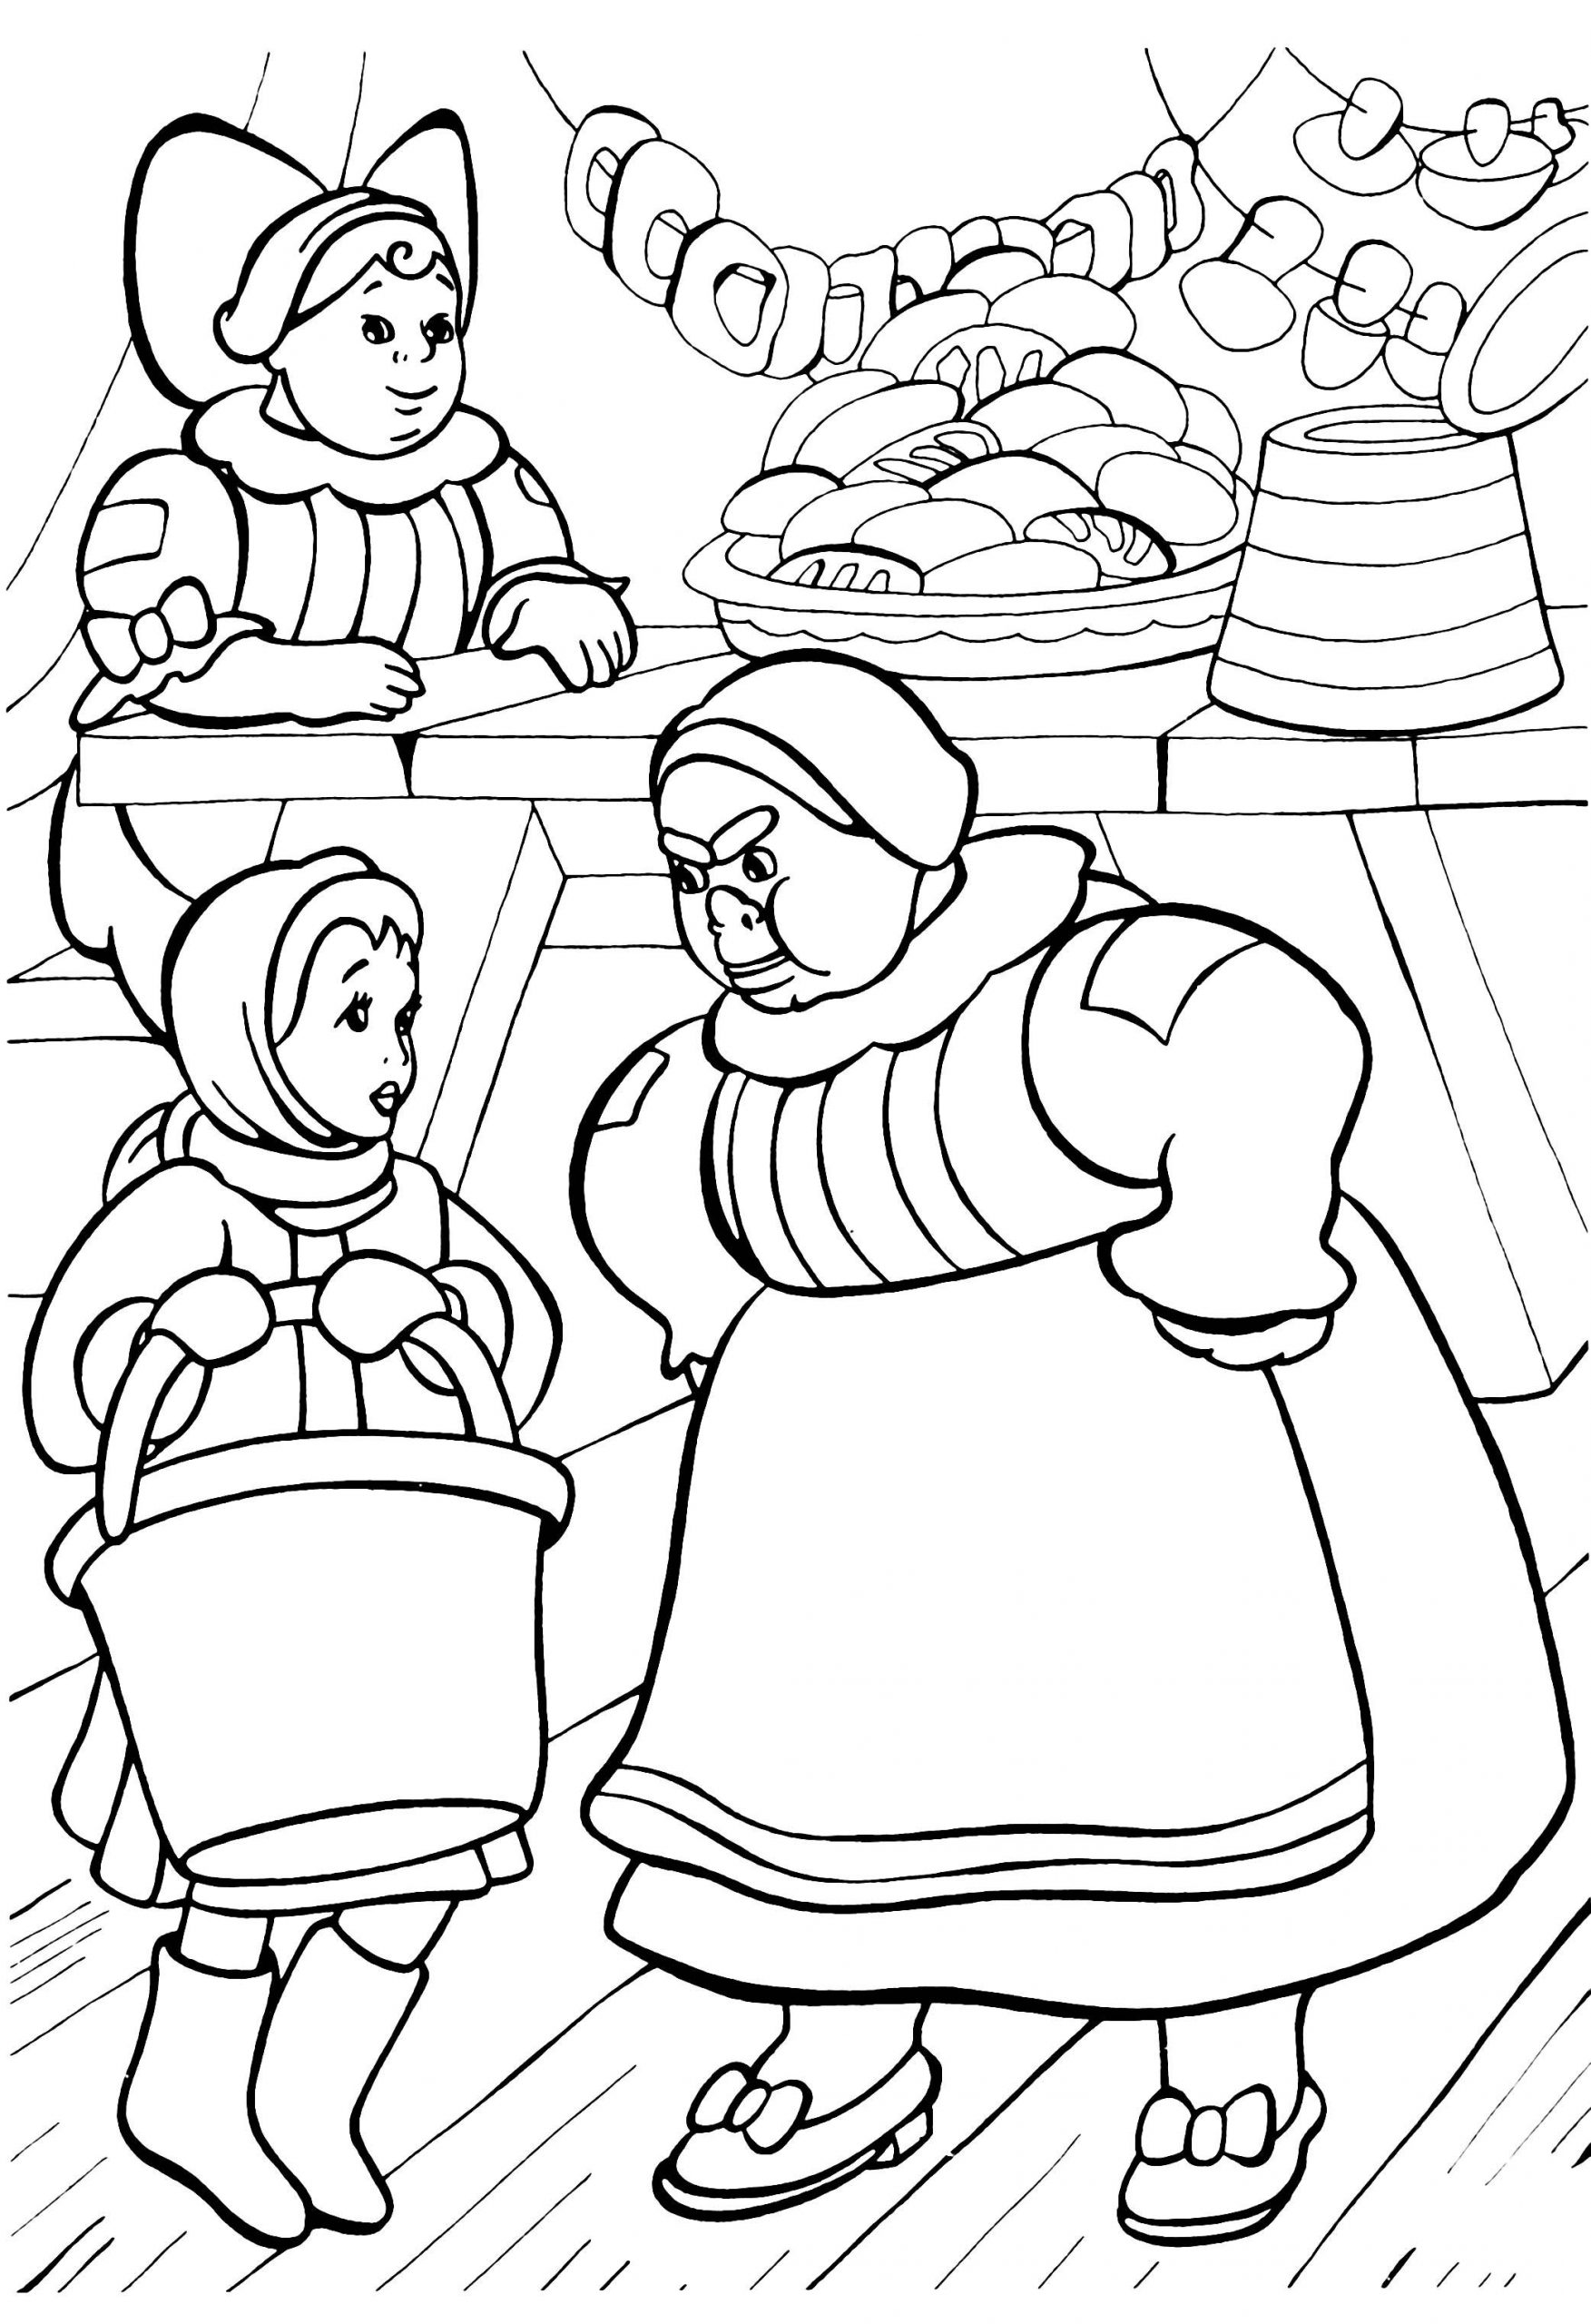 12 months coloring page